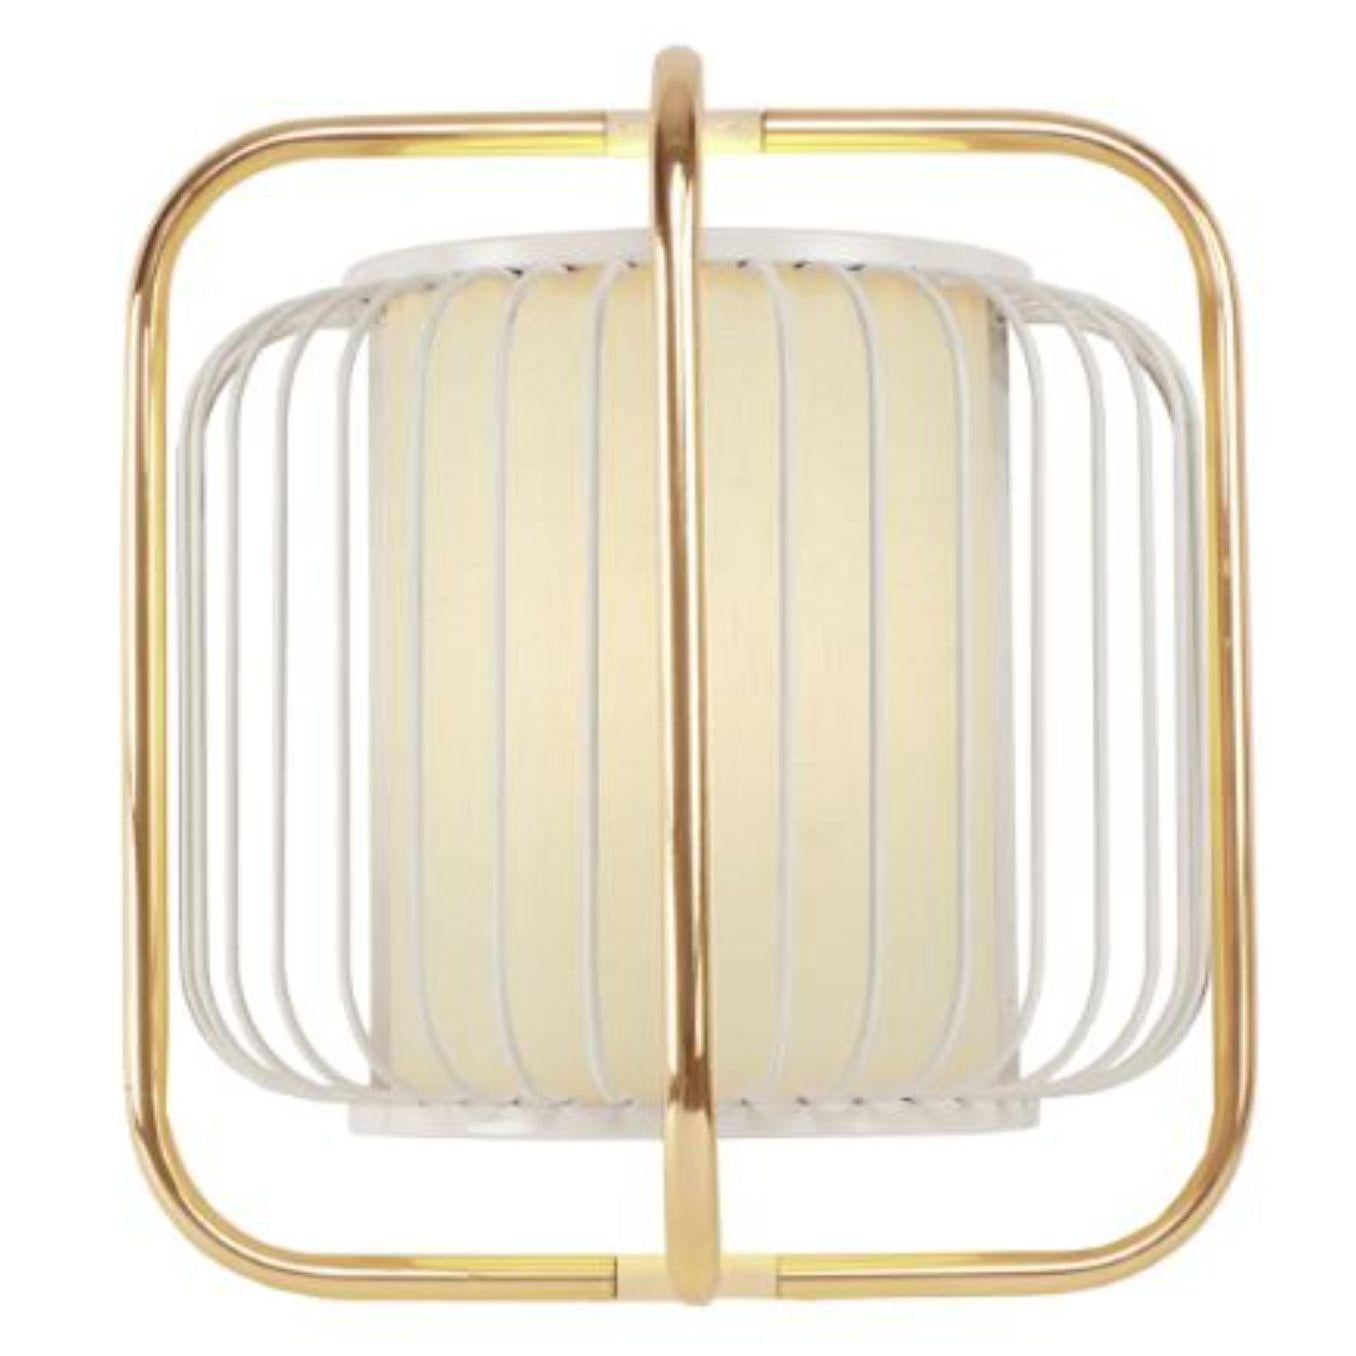 Brass and ivory Jules wall lamp by Dooq.
Dimensions: W 40 x D 23 x H 40 cm
Materials: lacquered metal, polished or brushed metal, brass.
Abat-jour: cotton
Also available in different colors and materials.

Information:
230V/50Hz
E14/1x15W